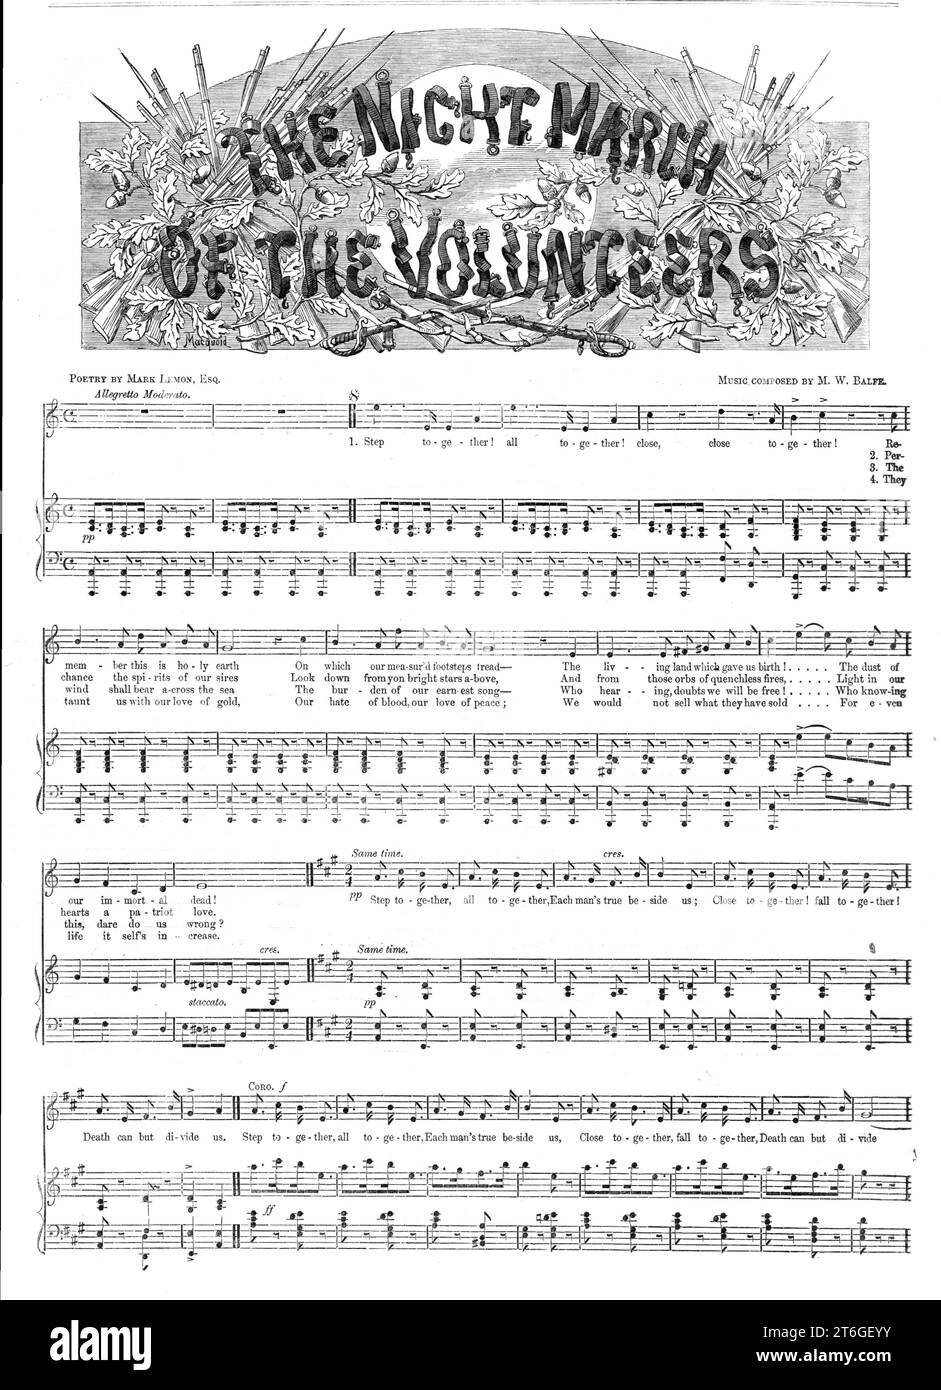 &quot;The Night March of the Volunteers&quot;, 1860. Song - music by W. M. Balfe, words by Mark Lemon. 'Step together! All together! Close together! Remember this is holy earth On which our measured footsteps tread - The living land which gave us birth! The dust of our immortal dead! Chorus. Step together! All together! Each man's true beside us; Close together! Fall together! Death can but divide us! Step together! All together! Close together! The happy spirits of our sires Look down from yon bright stars above, And from those orbs of quenchless fires Light in our hearts a patriot love...The Stock Photo